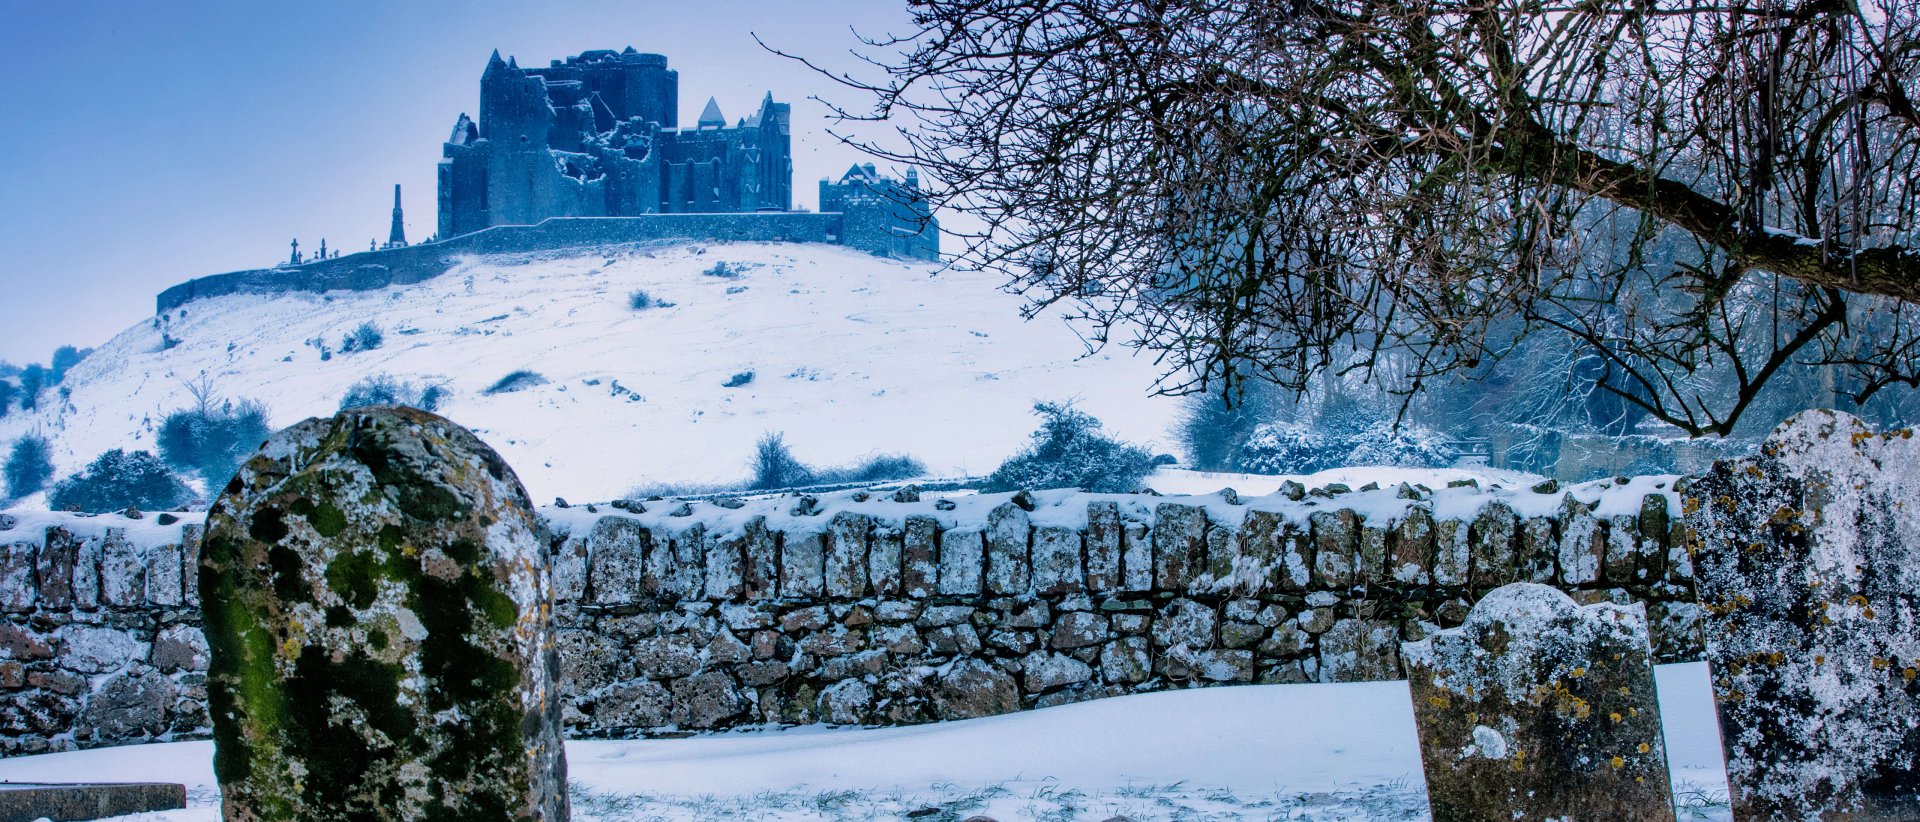 Snow At The Rock Of Cashel